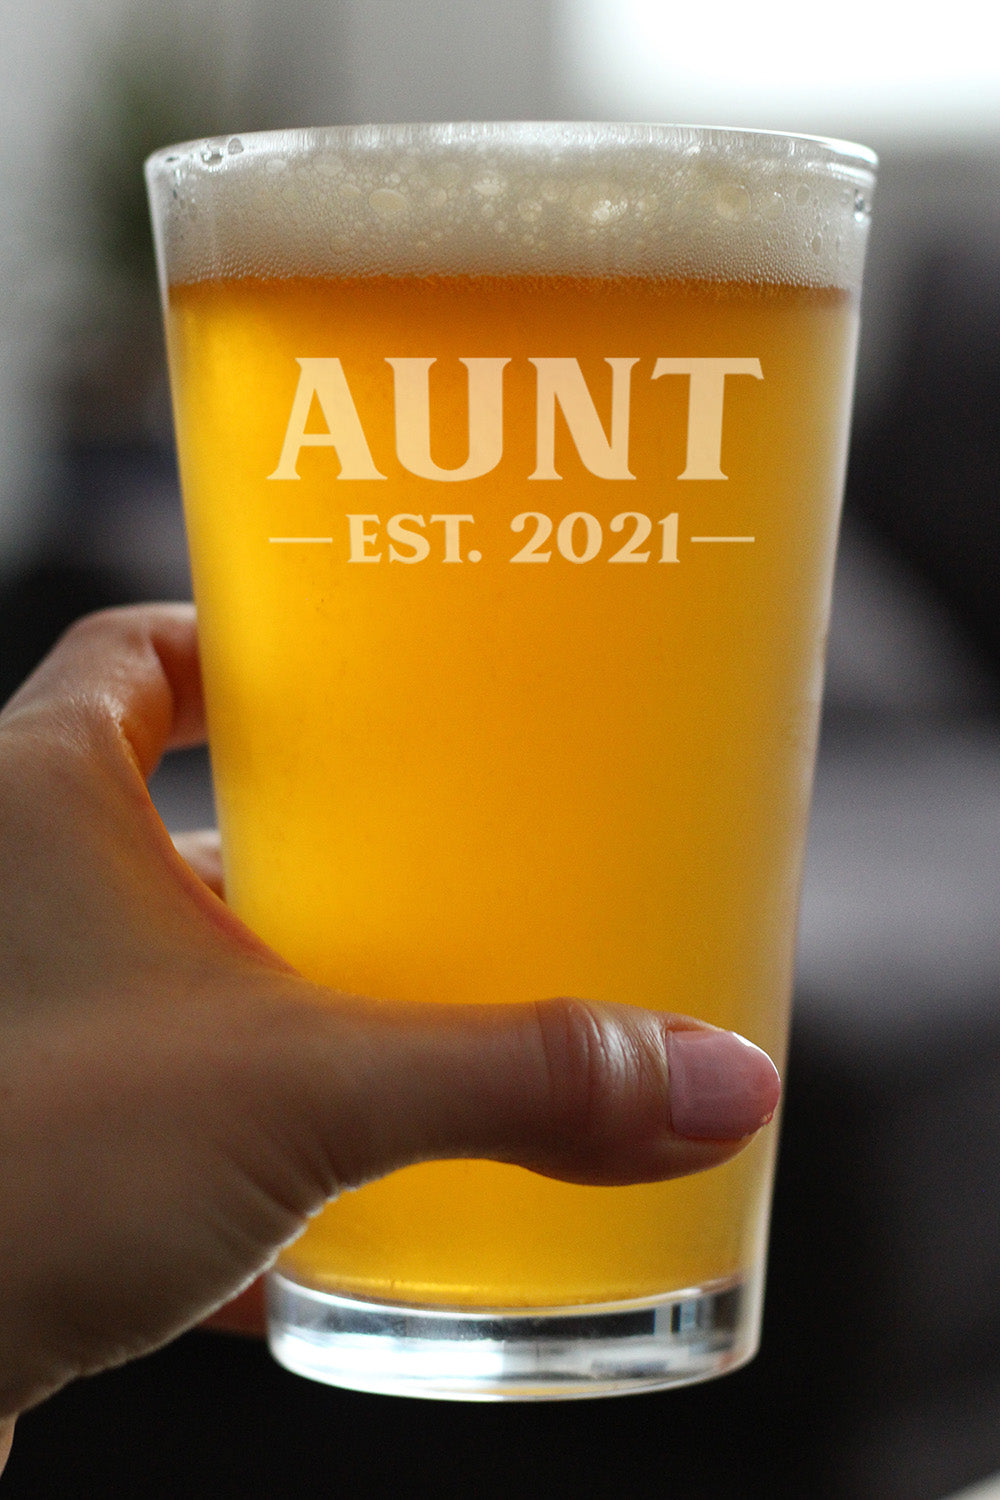 Aunt Est 2021 - New Aunties Pint Glass Gift for First Time Aunts - Bold 16 Oz Glasses